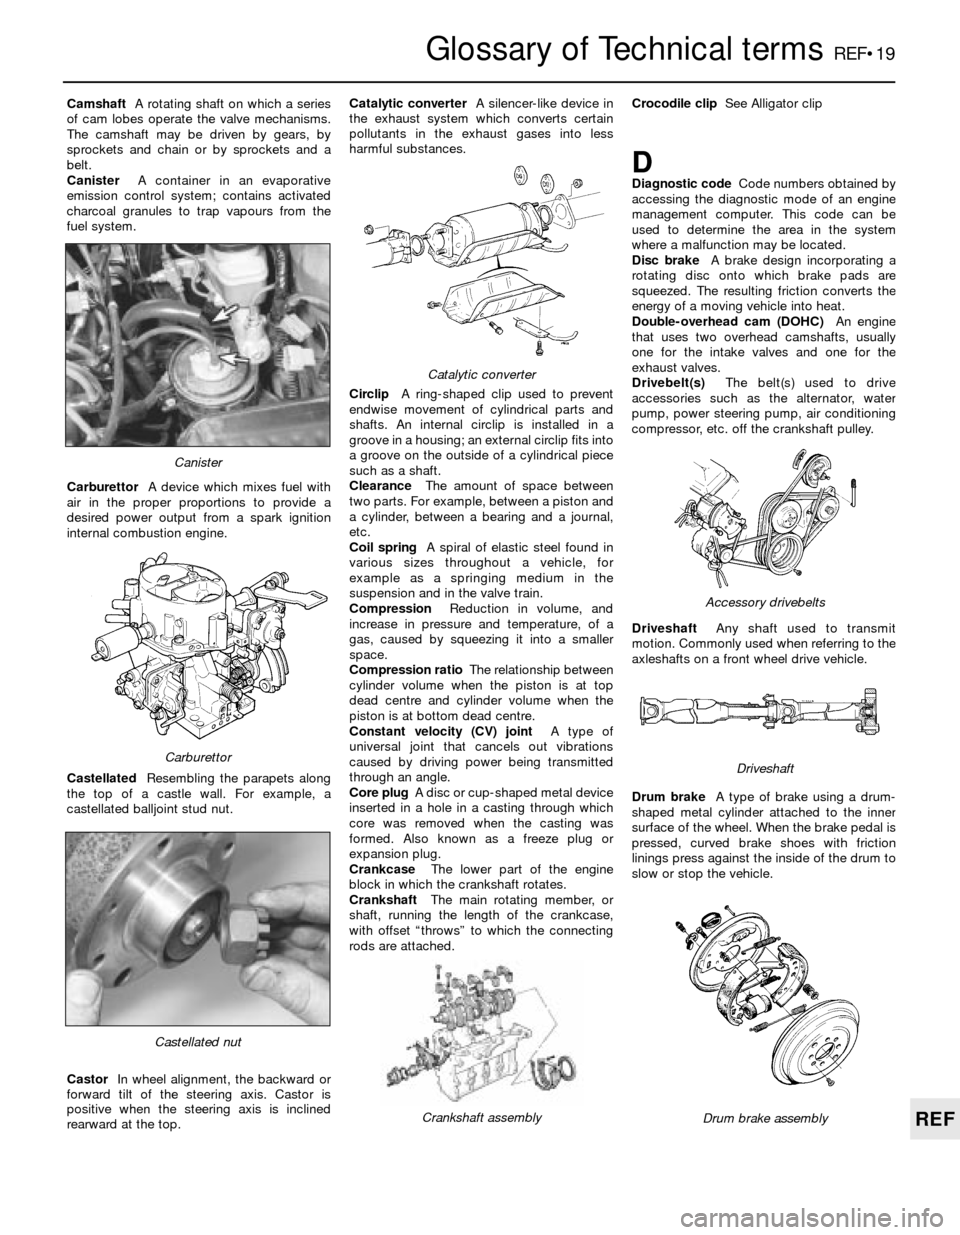 FORD SIERRA 1993 2.G Reference User Guide Glossary of Technical termsREF•19
REF
CamshaftA rotating shaft on which a series
of cam lobes operate the valve mechanisms.
The camshaft may be driven by gears, by
sprockets and chain or by sprocket